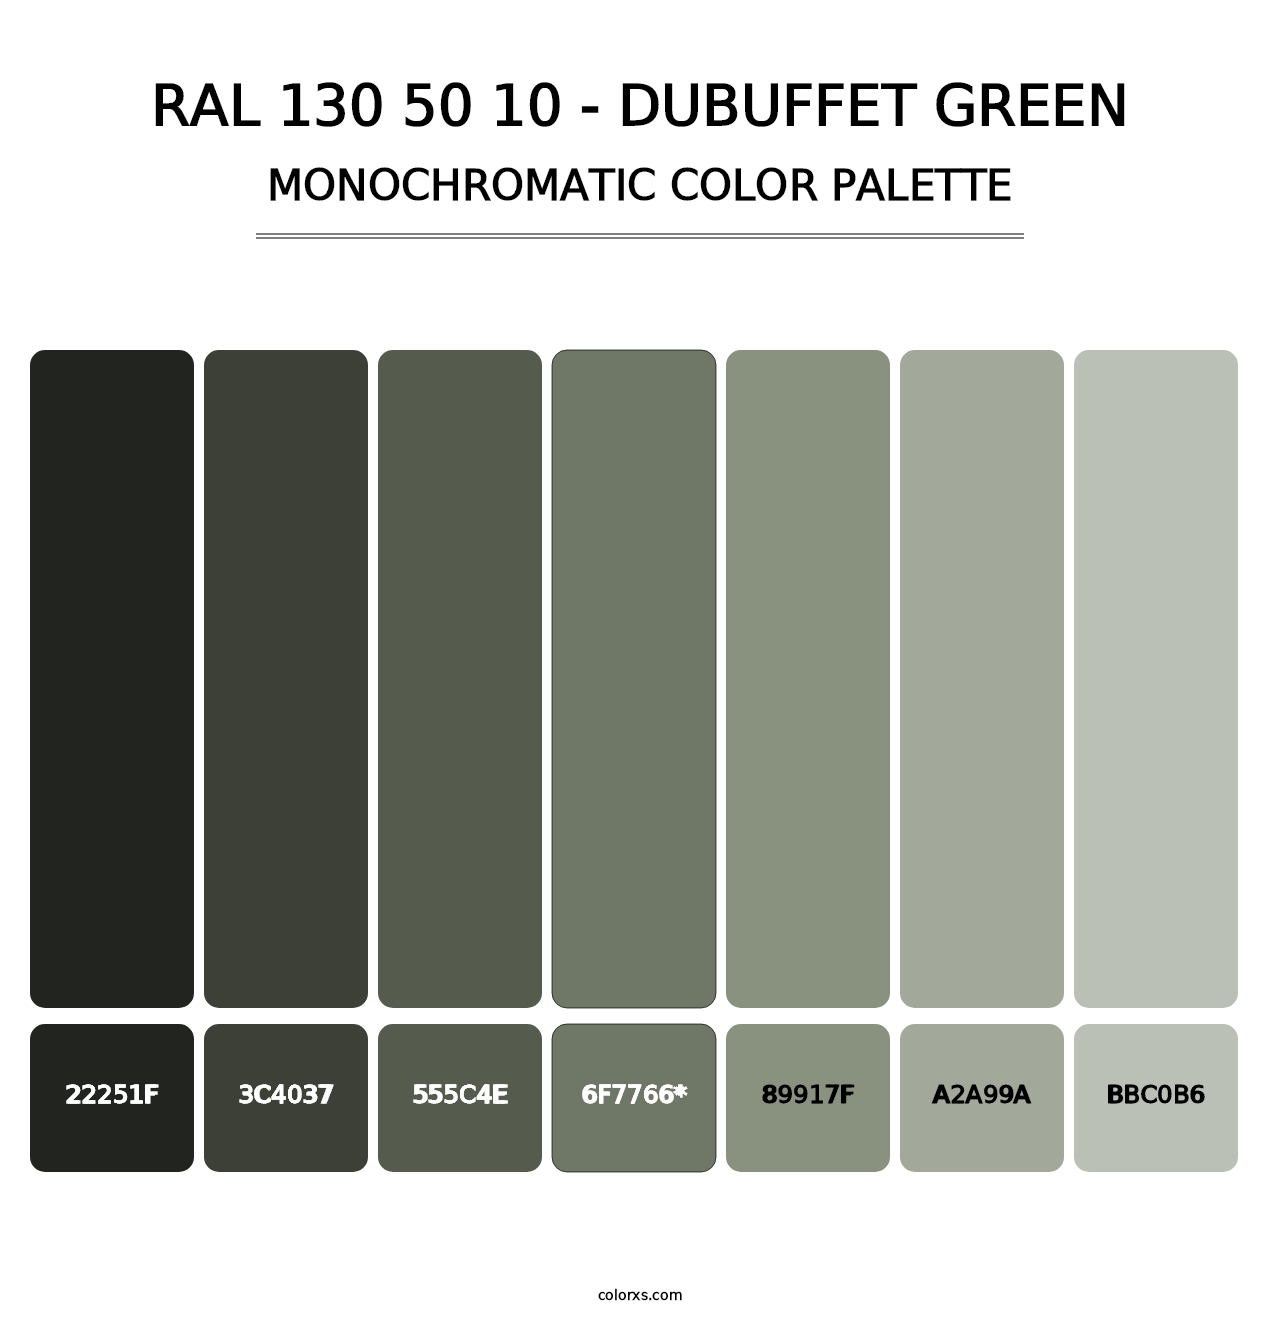 RAL 130 50 10 - Dubuffet Green - Monochromatic Color Palette